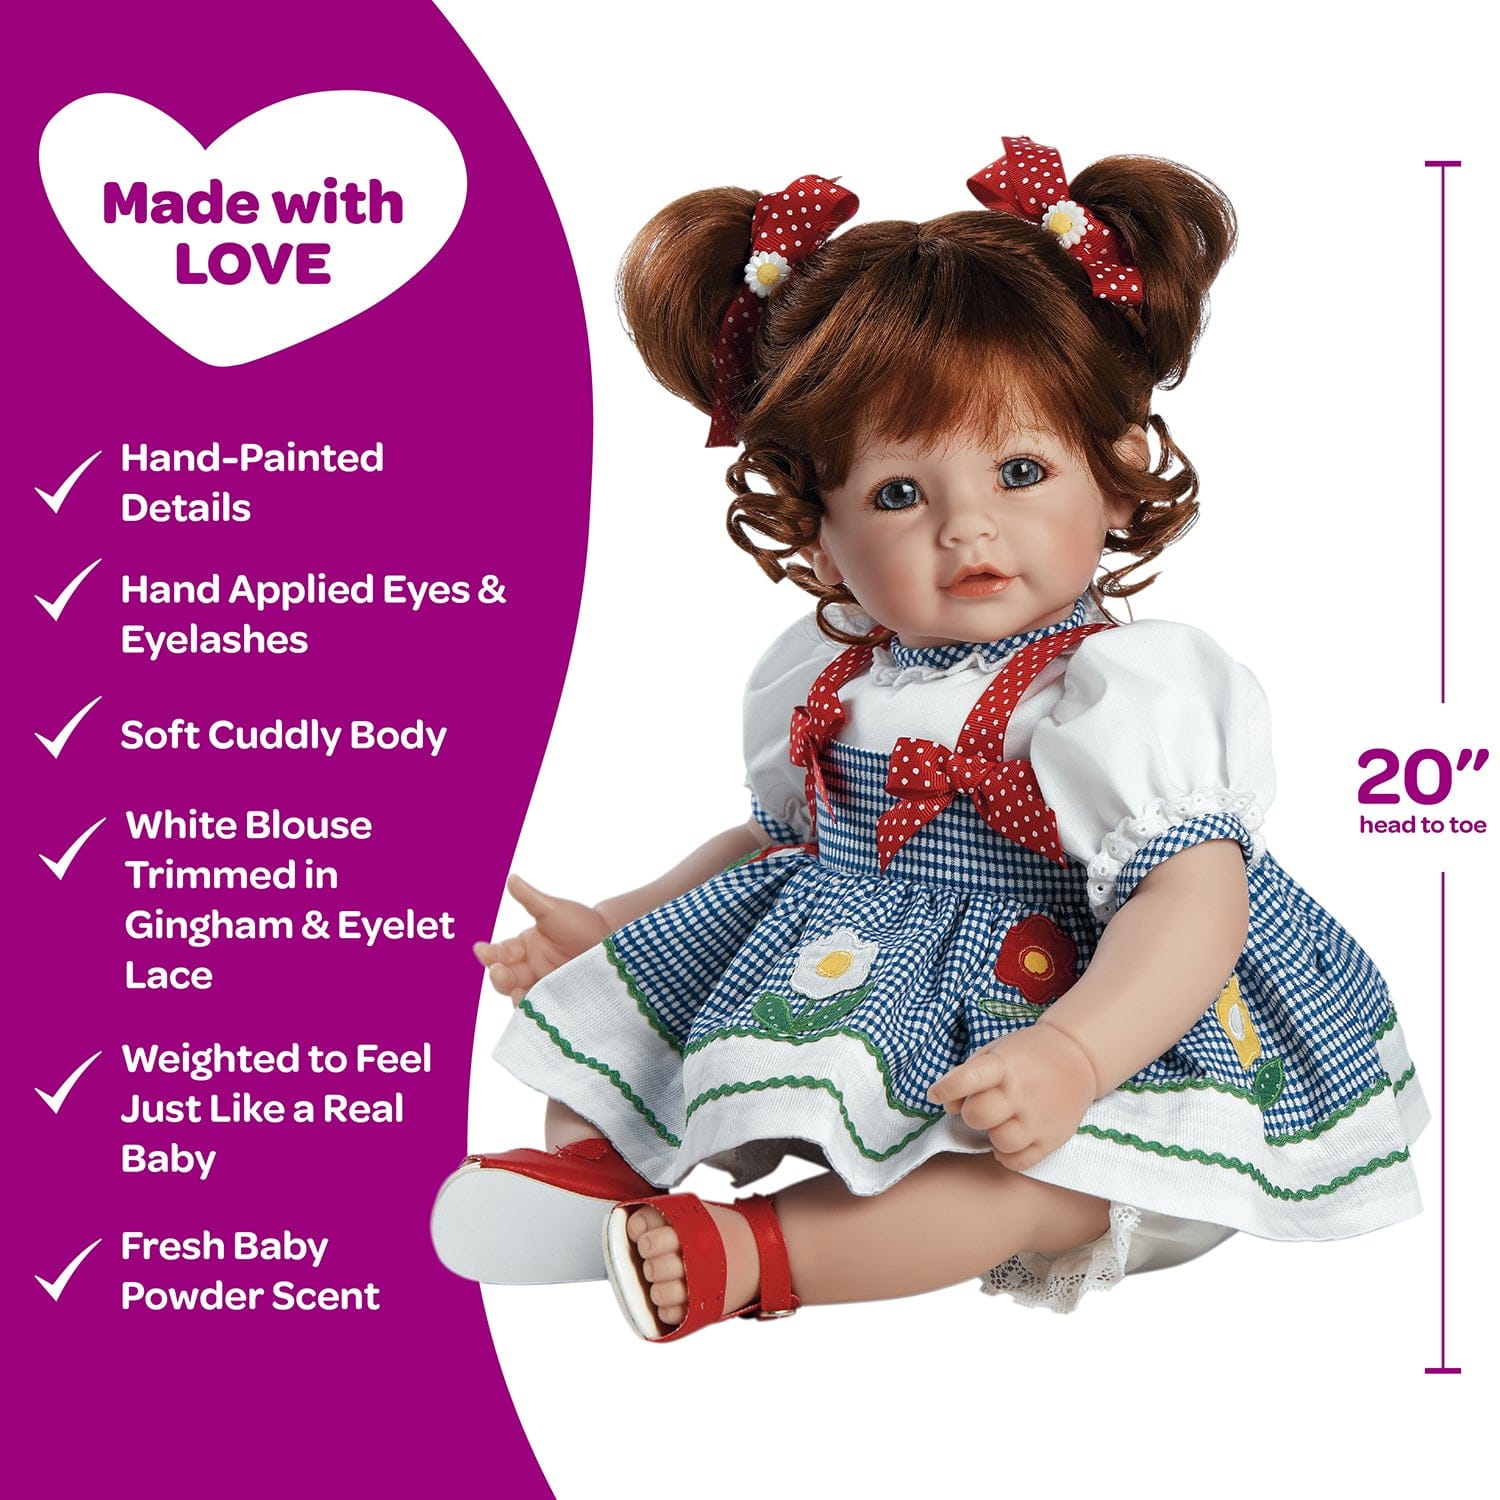 Adora Toddlertime Daisy Delight Baby Doll, Doll Clothes & Accessories Set